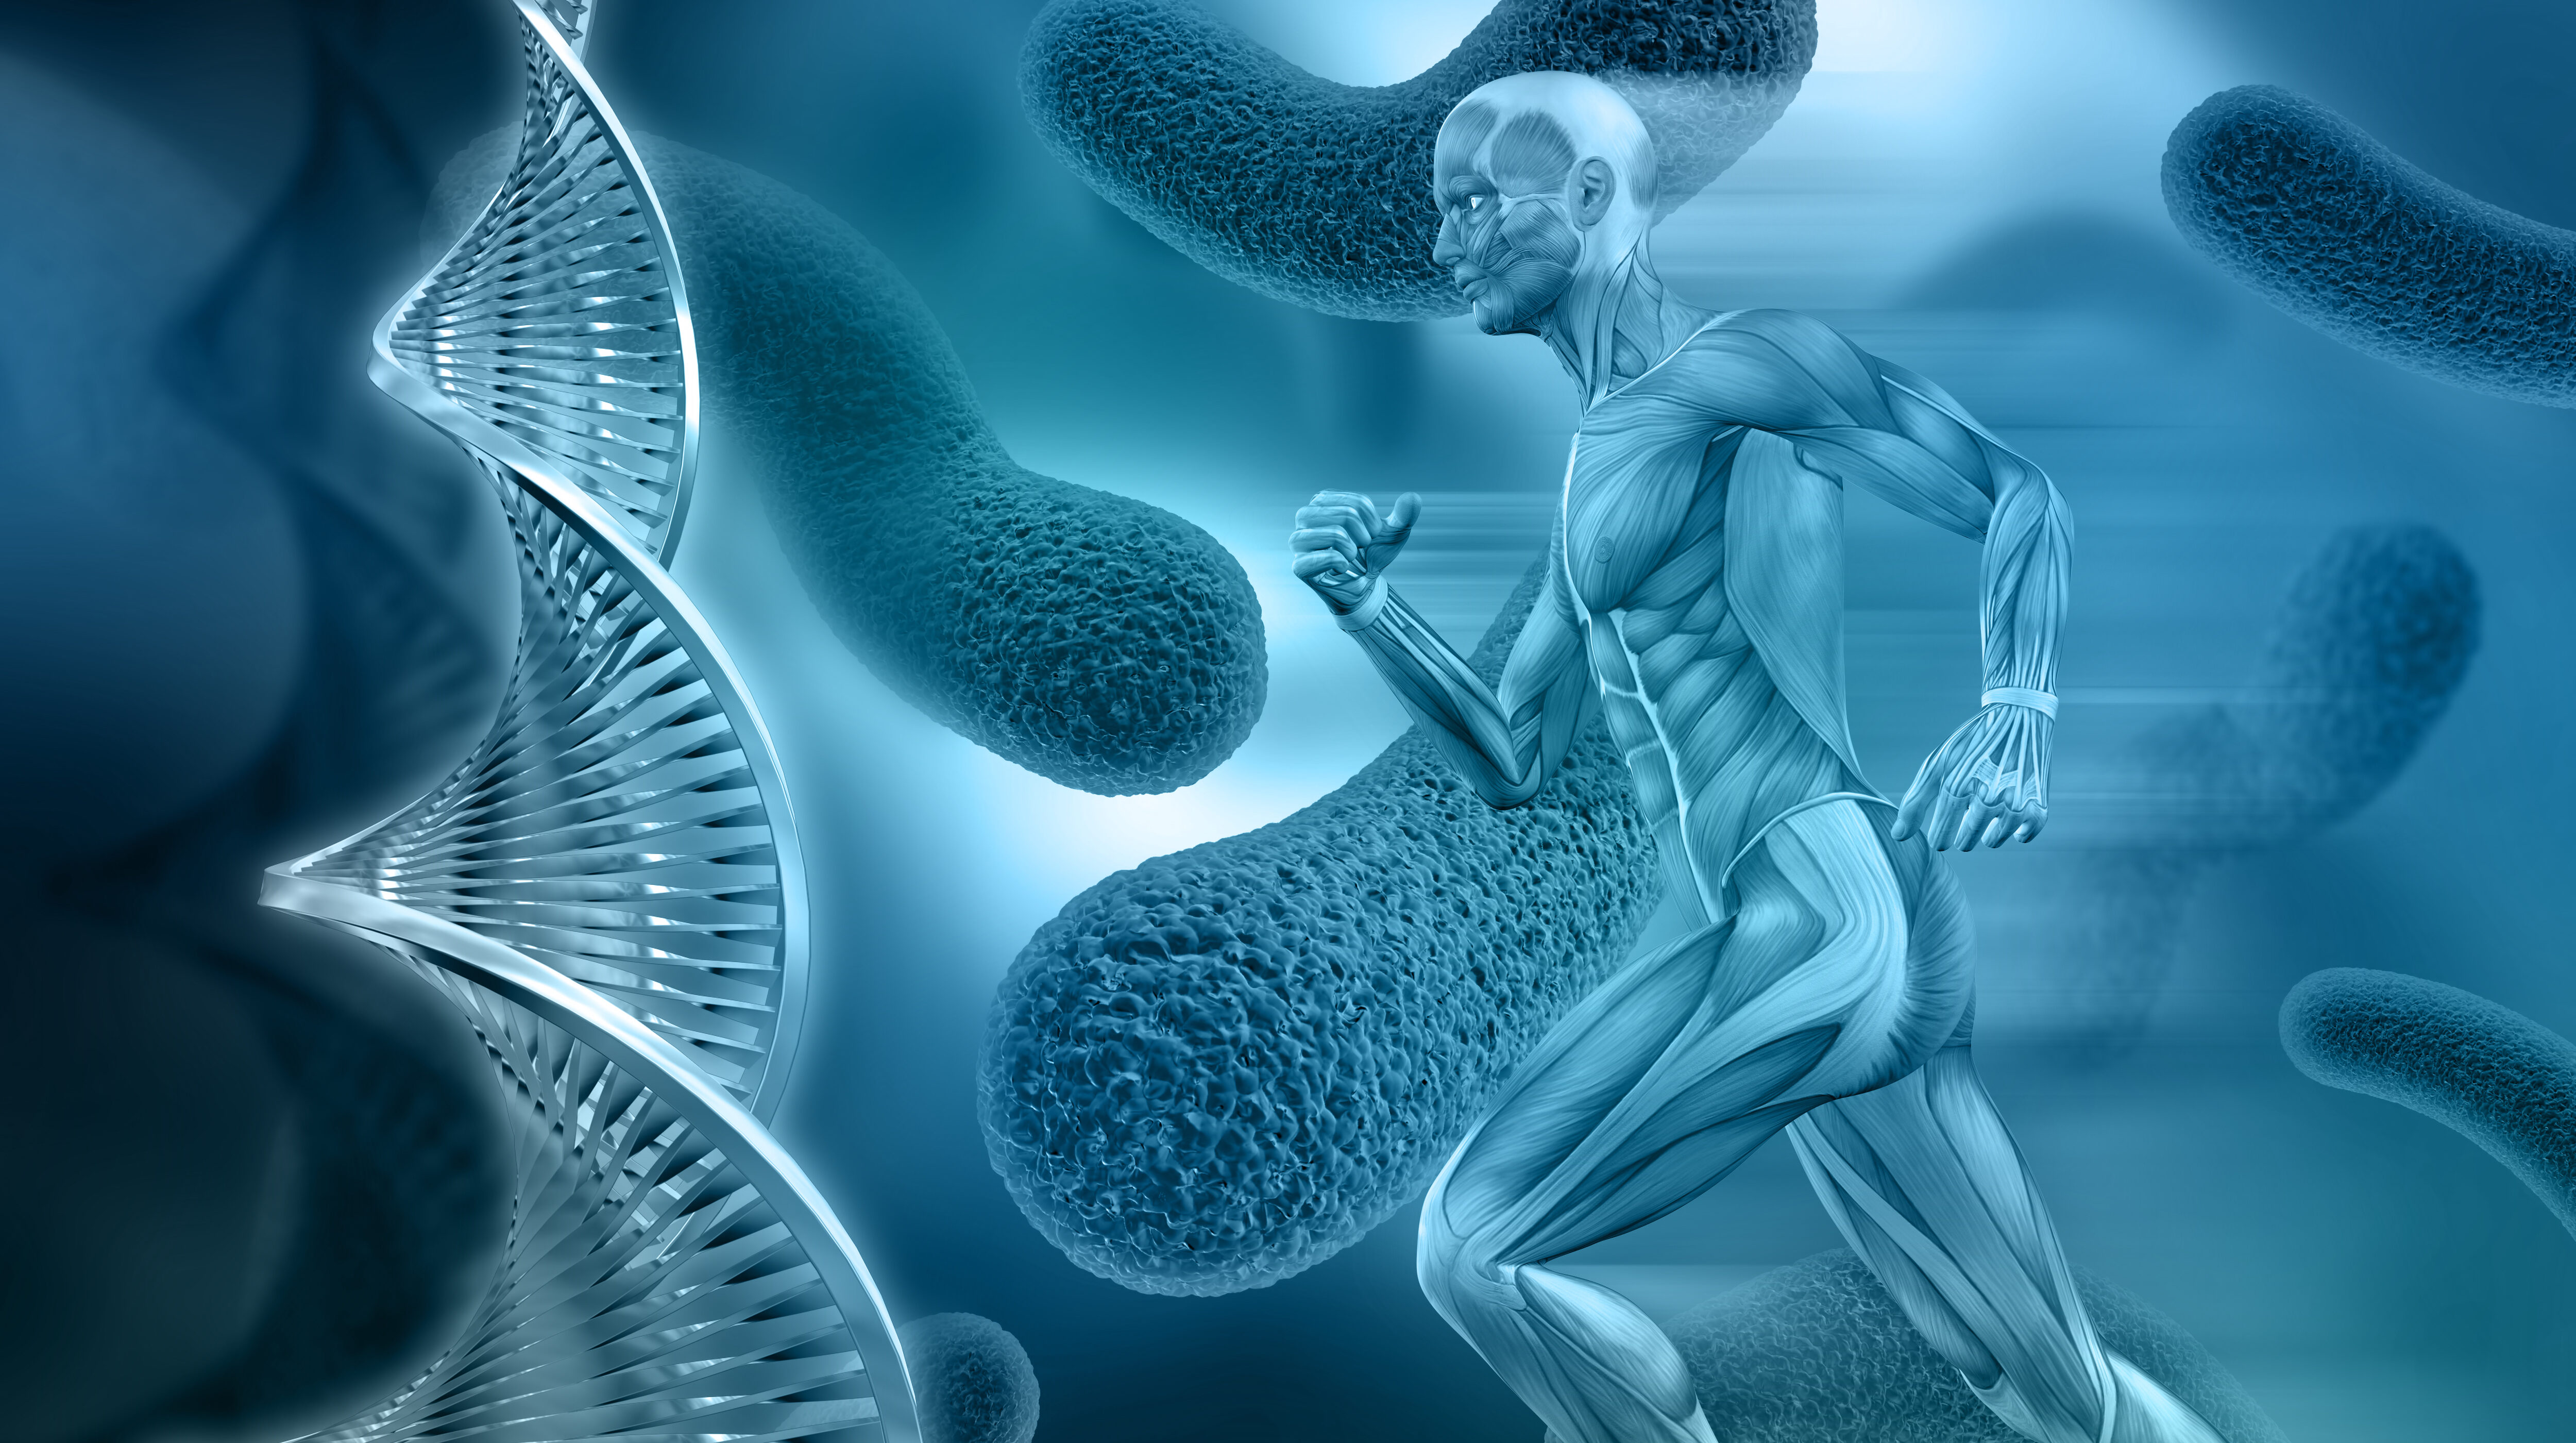 3D male medical figure with muscle map on an abstract virus background with DNA strands